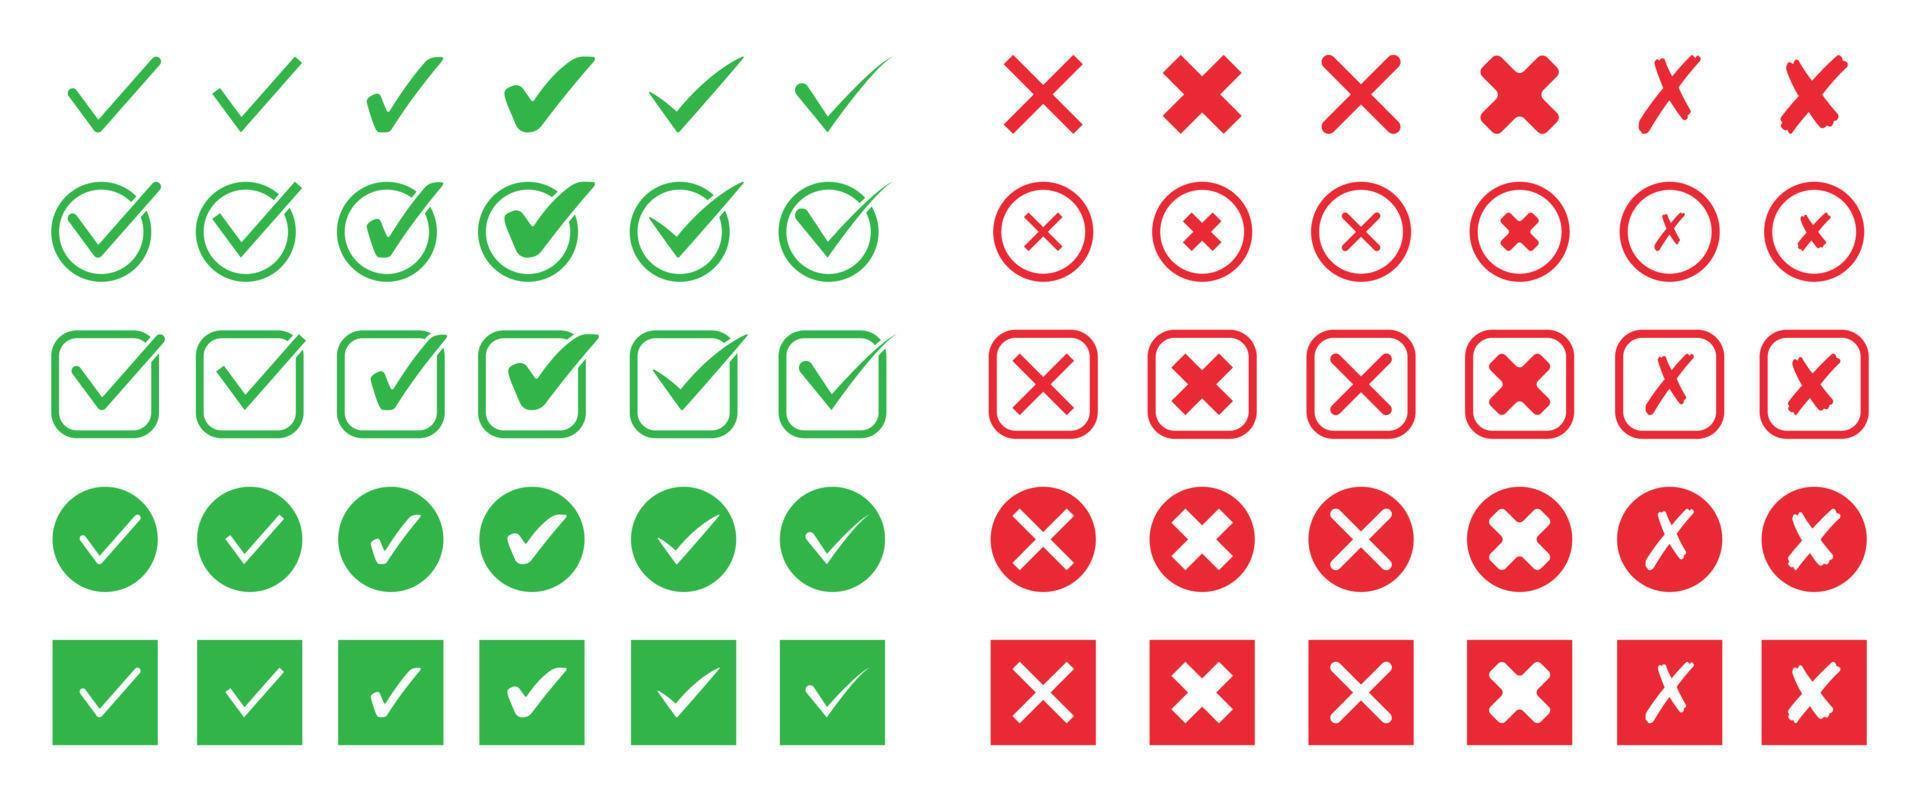 Set of check mark flat icon. Green tick and red cross symbol for checklist. Vector